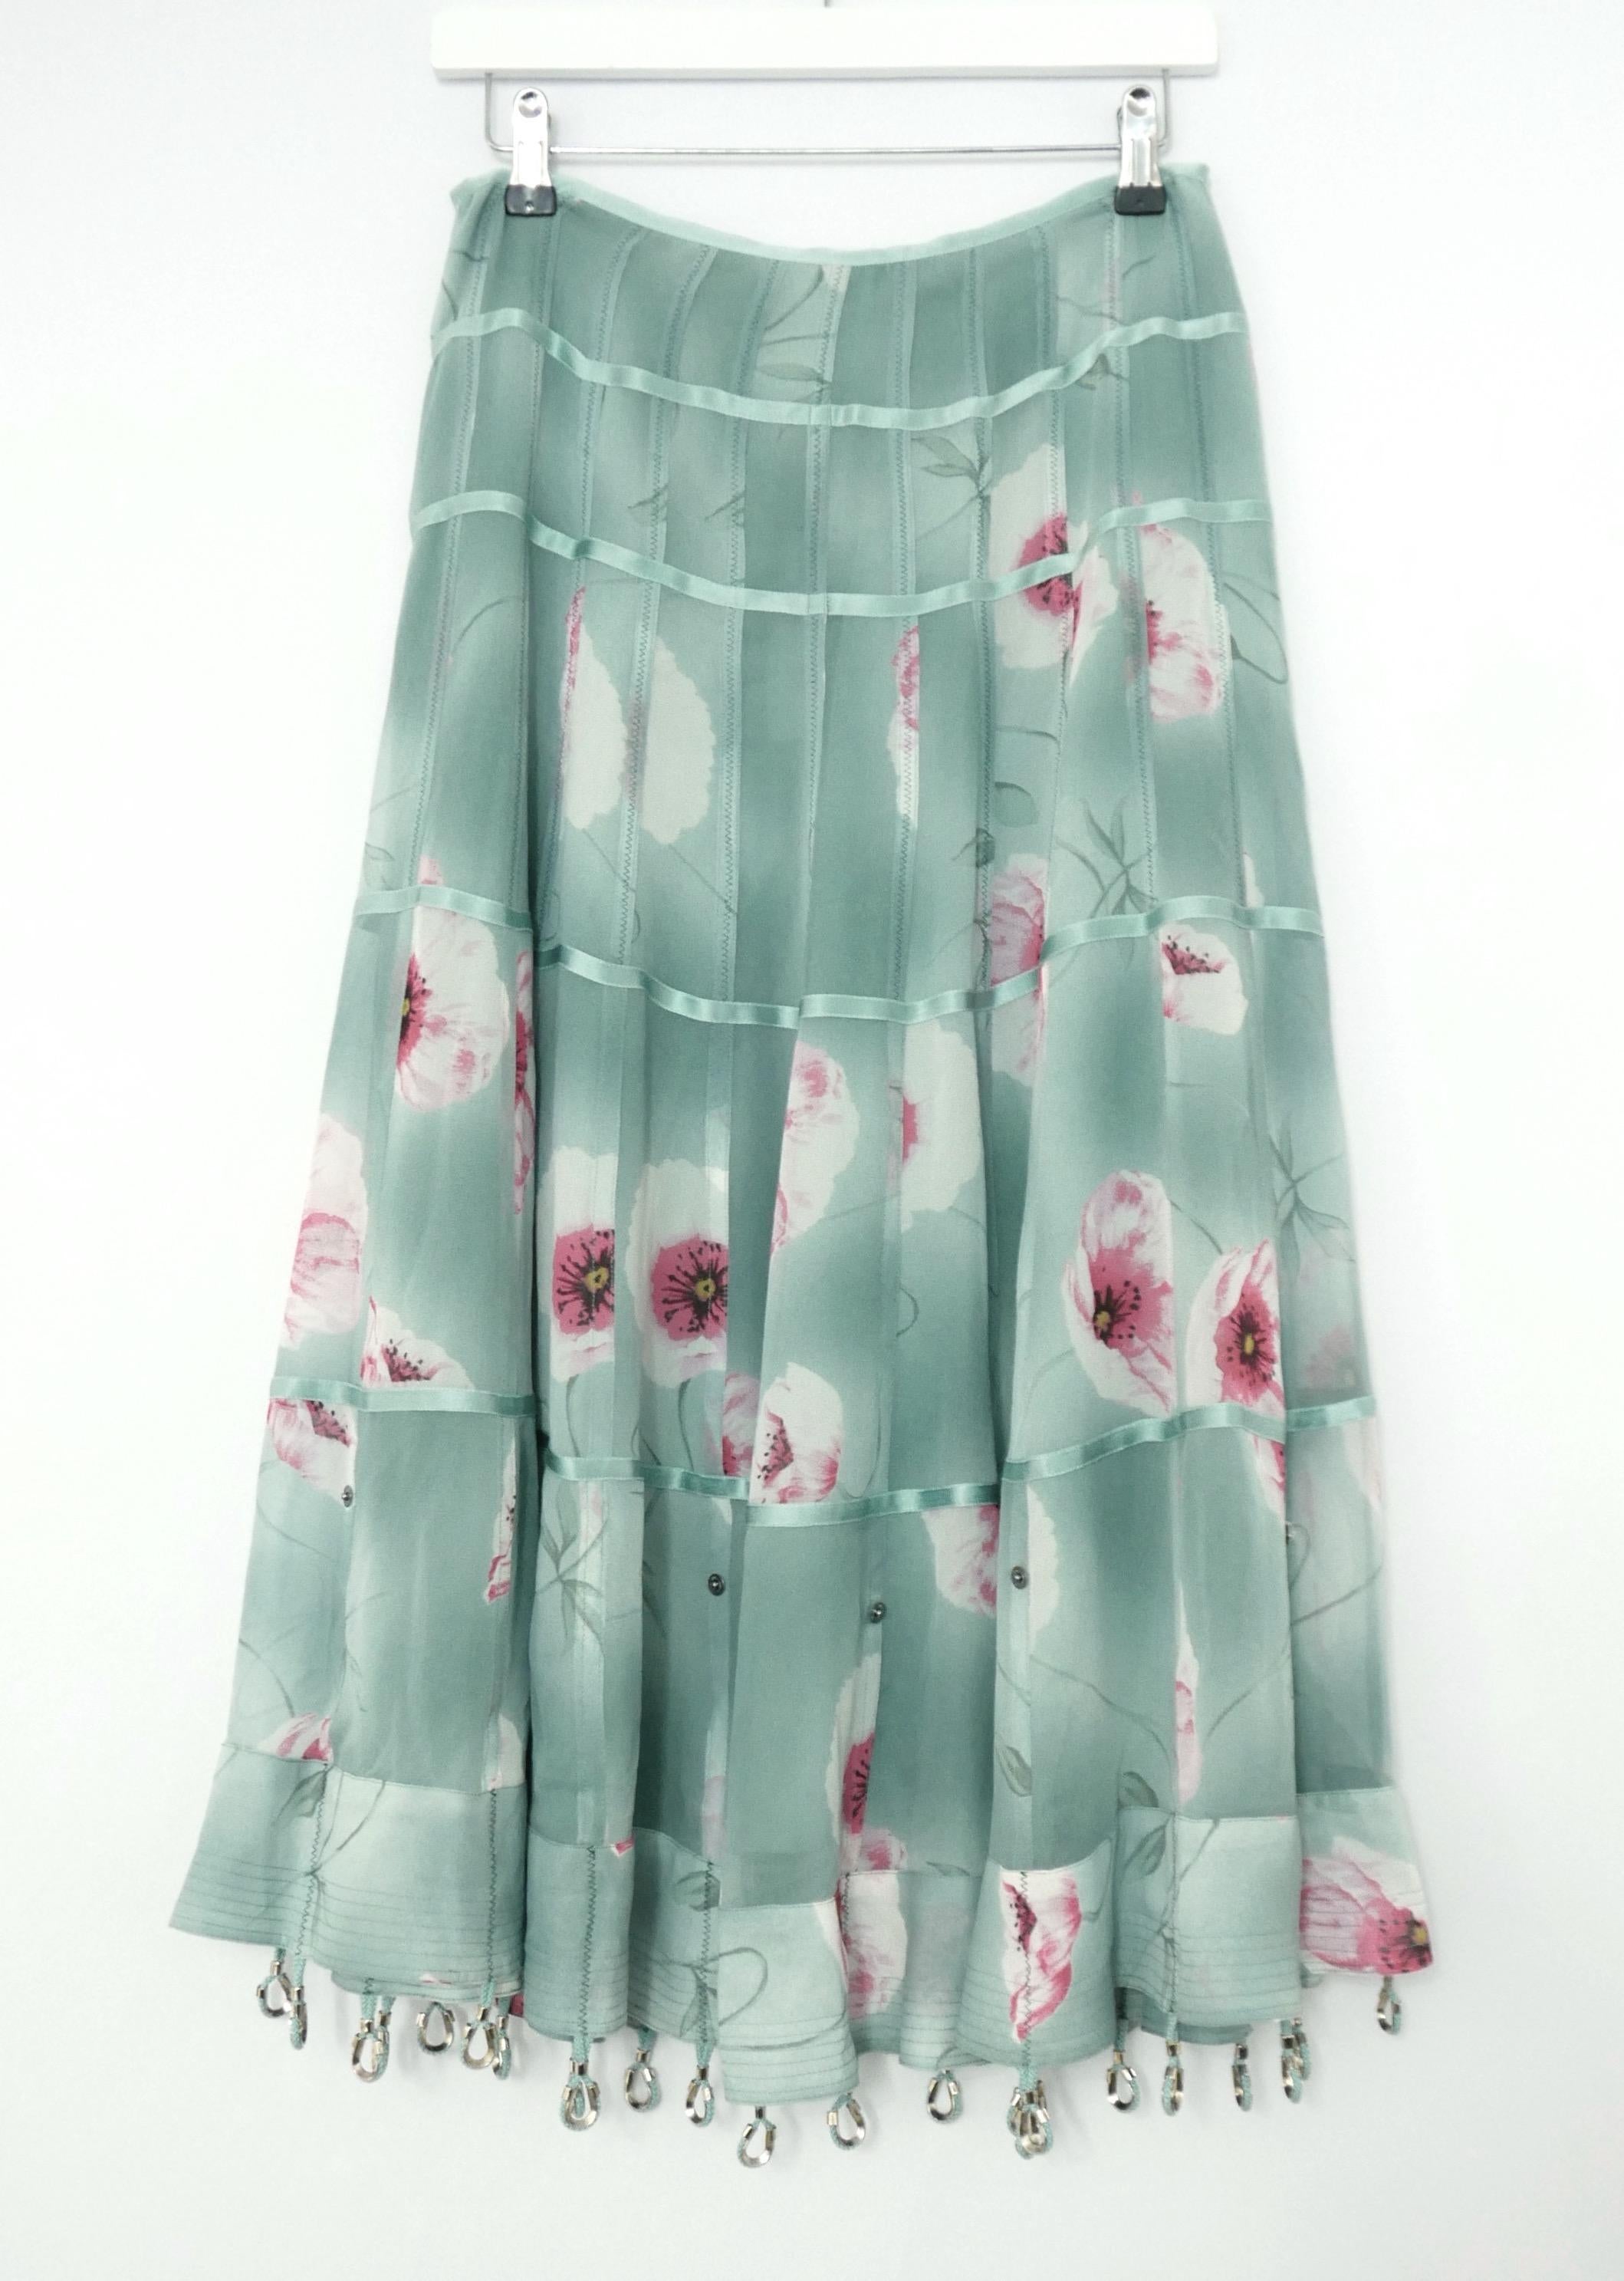 Women's Christian Dior x Galliano 2003 Floral Silk Hardware Trimmed Maxi Skirt For Sale